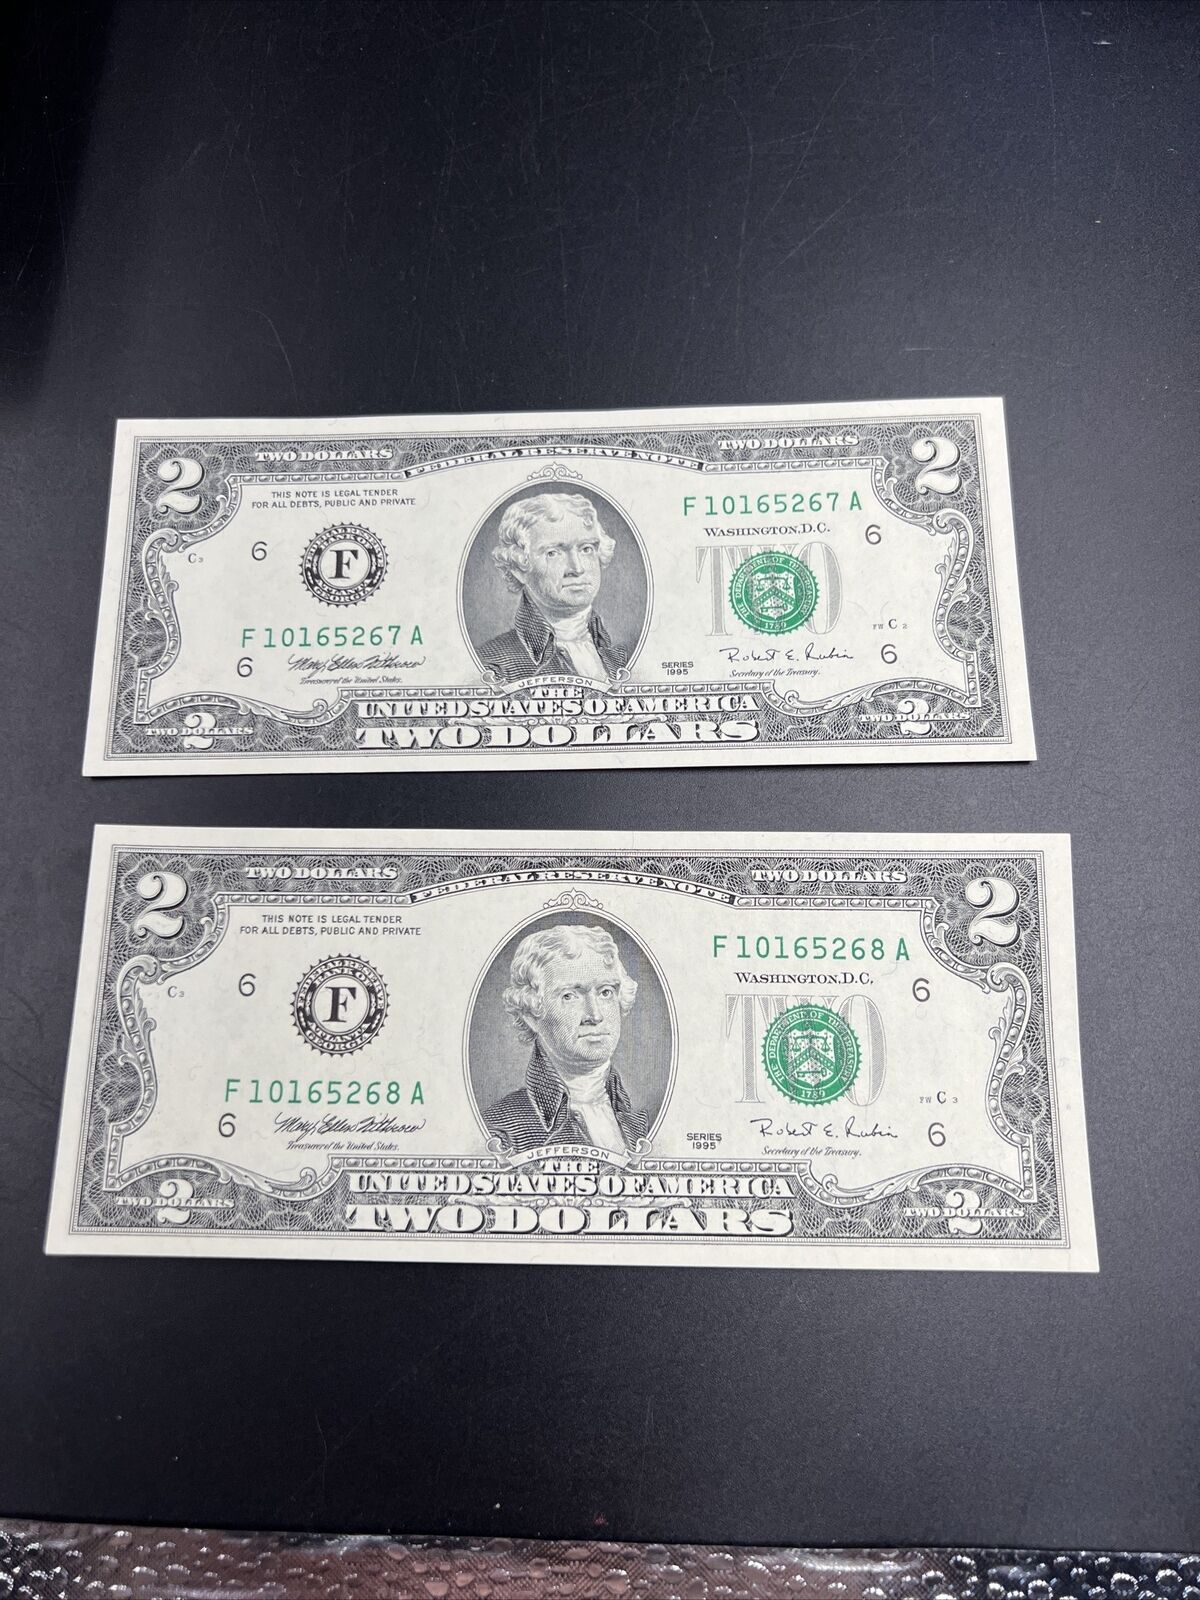 2 Consecutive 1995 $2 Two Dollar FRN Note Bills Choice UNC US Currency Banknotes